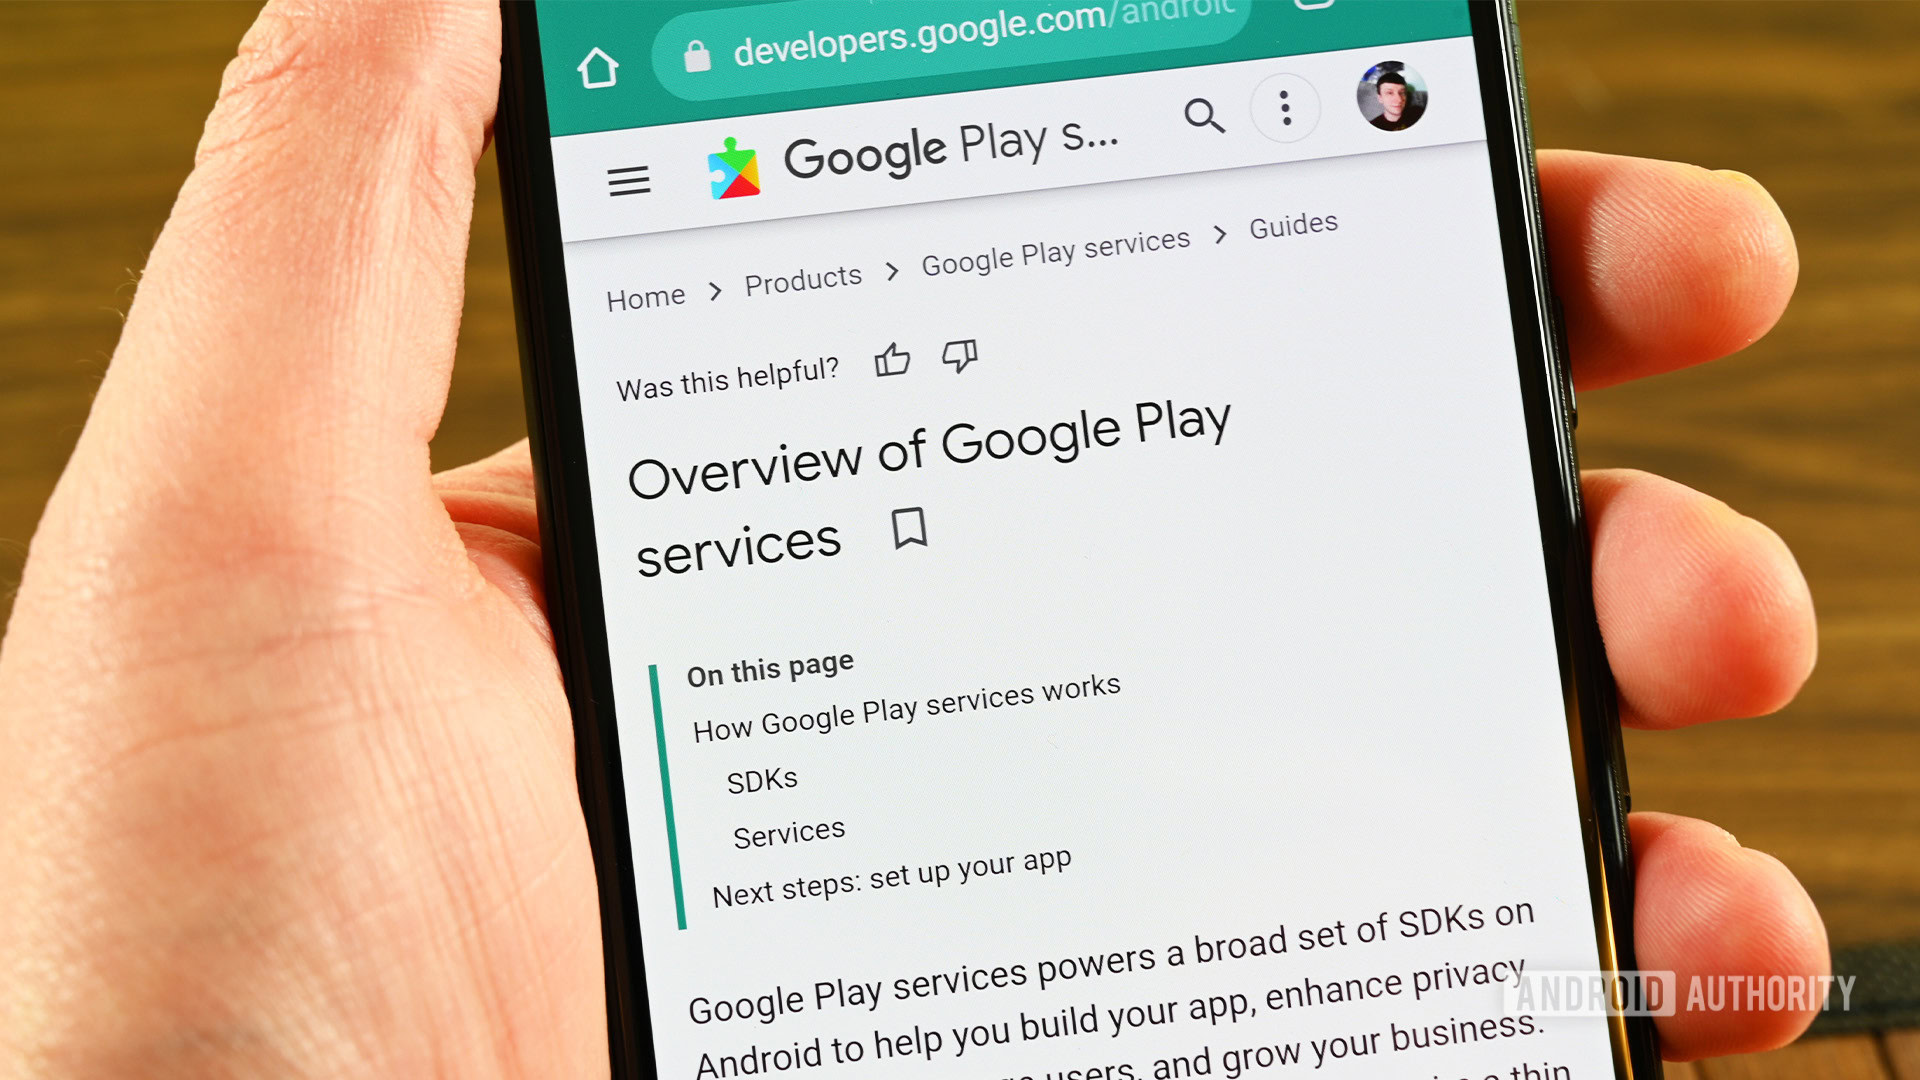 How to Update Google Play Services